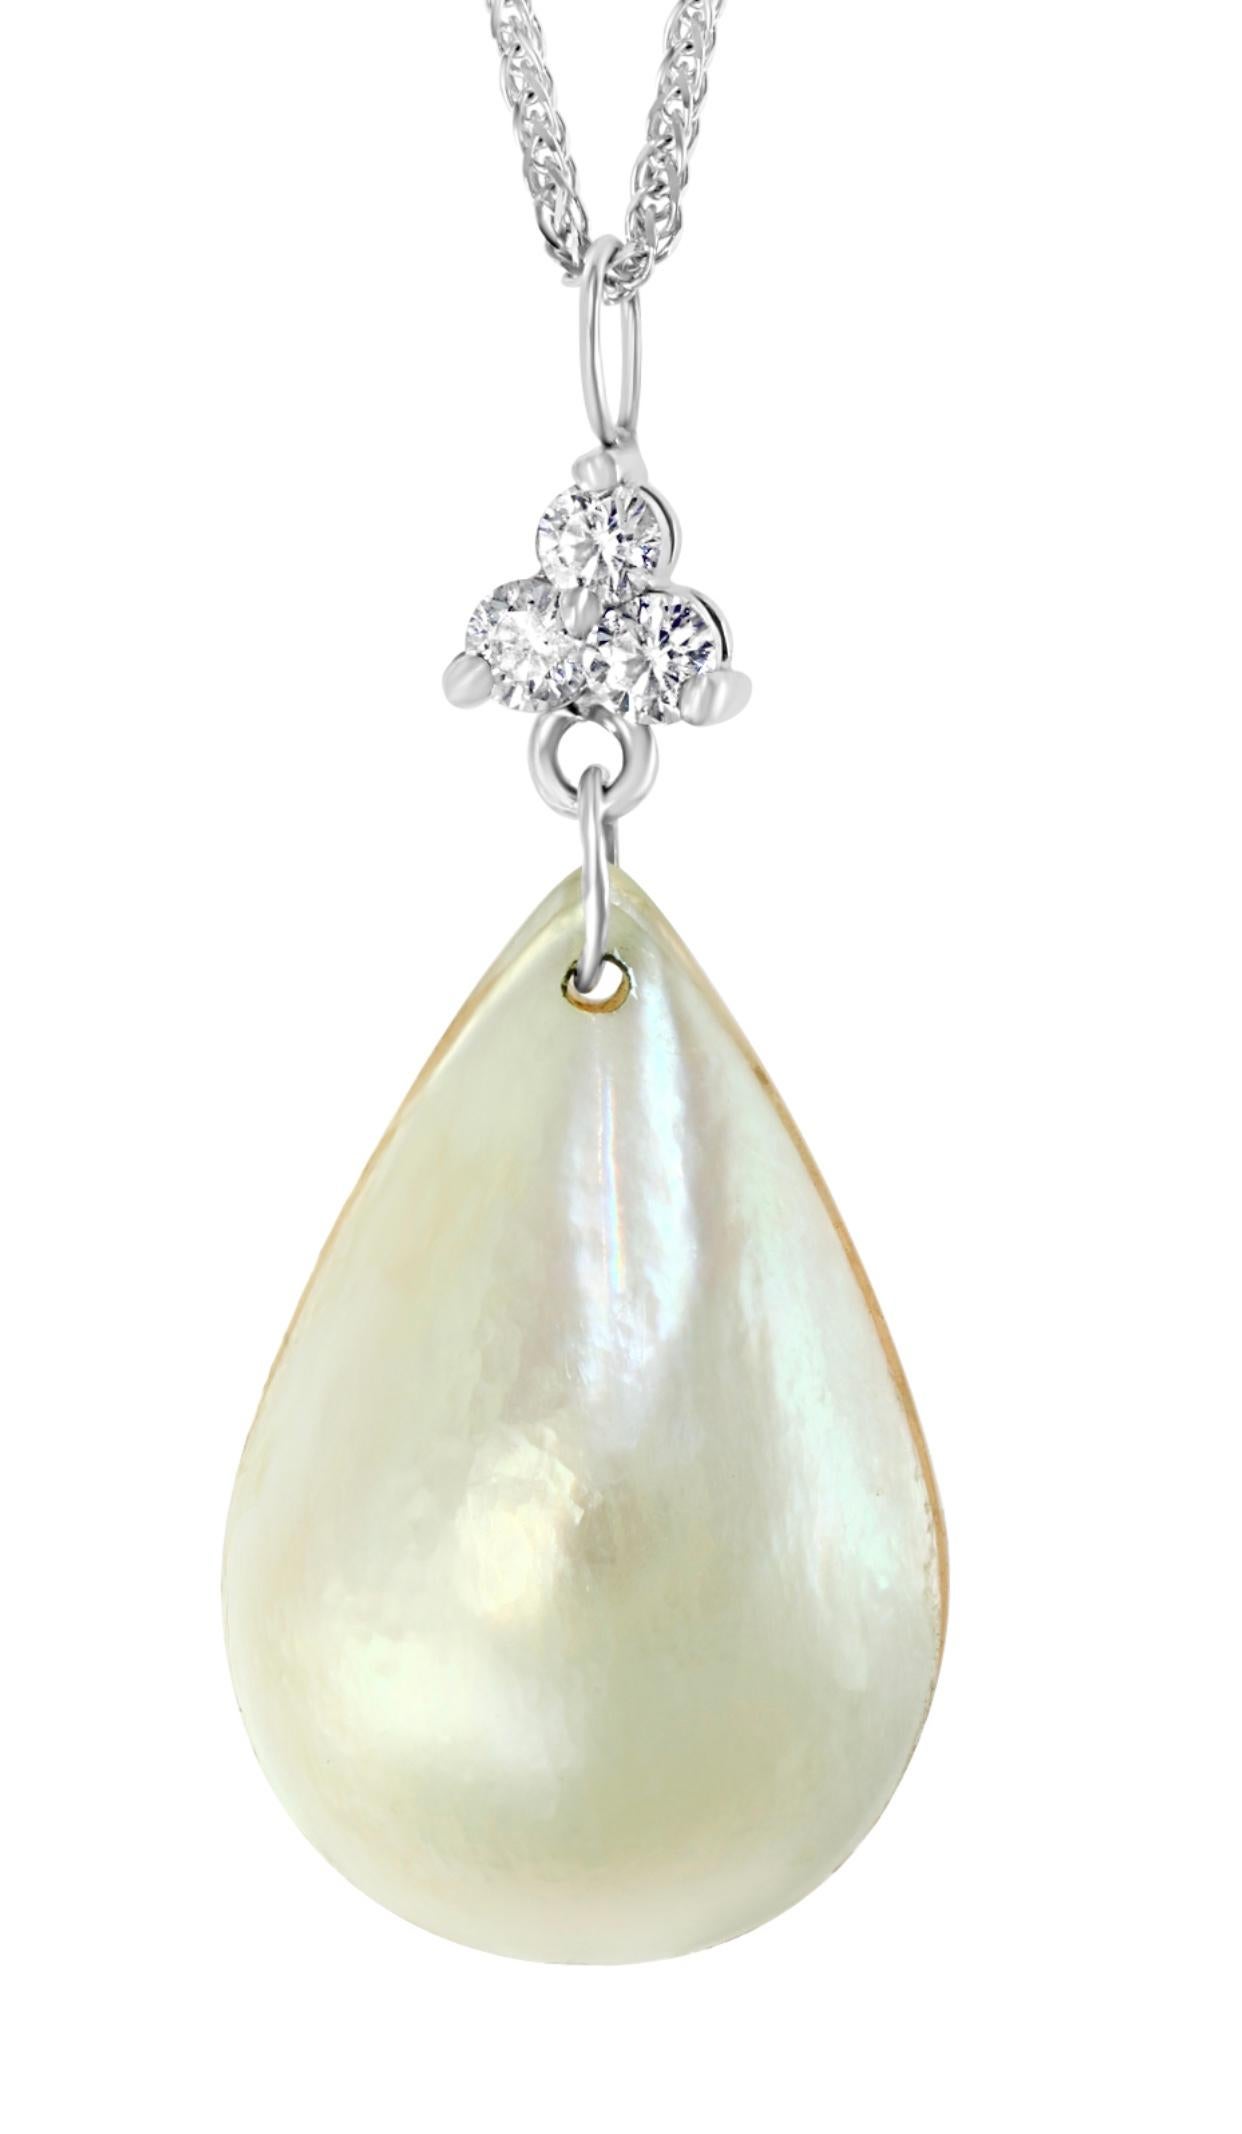 Pear Mabe Pearl & 0.36 Ct Diamond Pendant/ Necklace 14 Kt White Gold with Chain For Sale 3